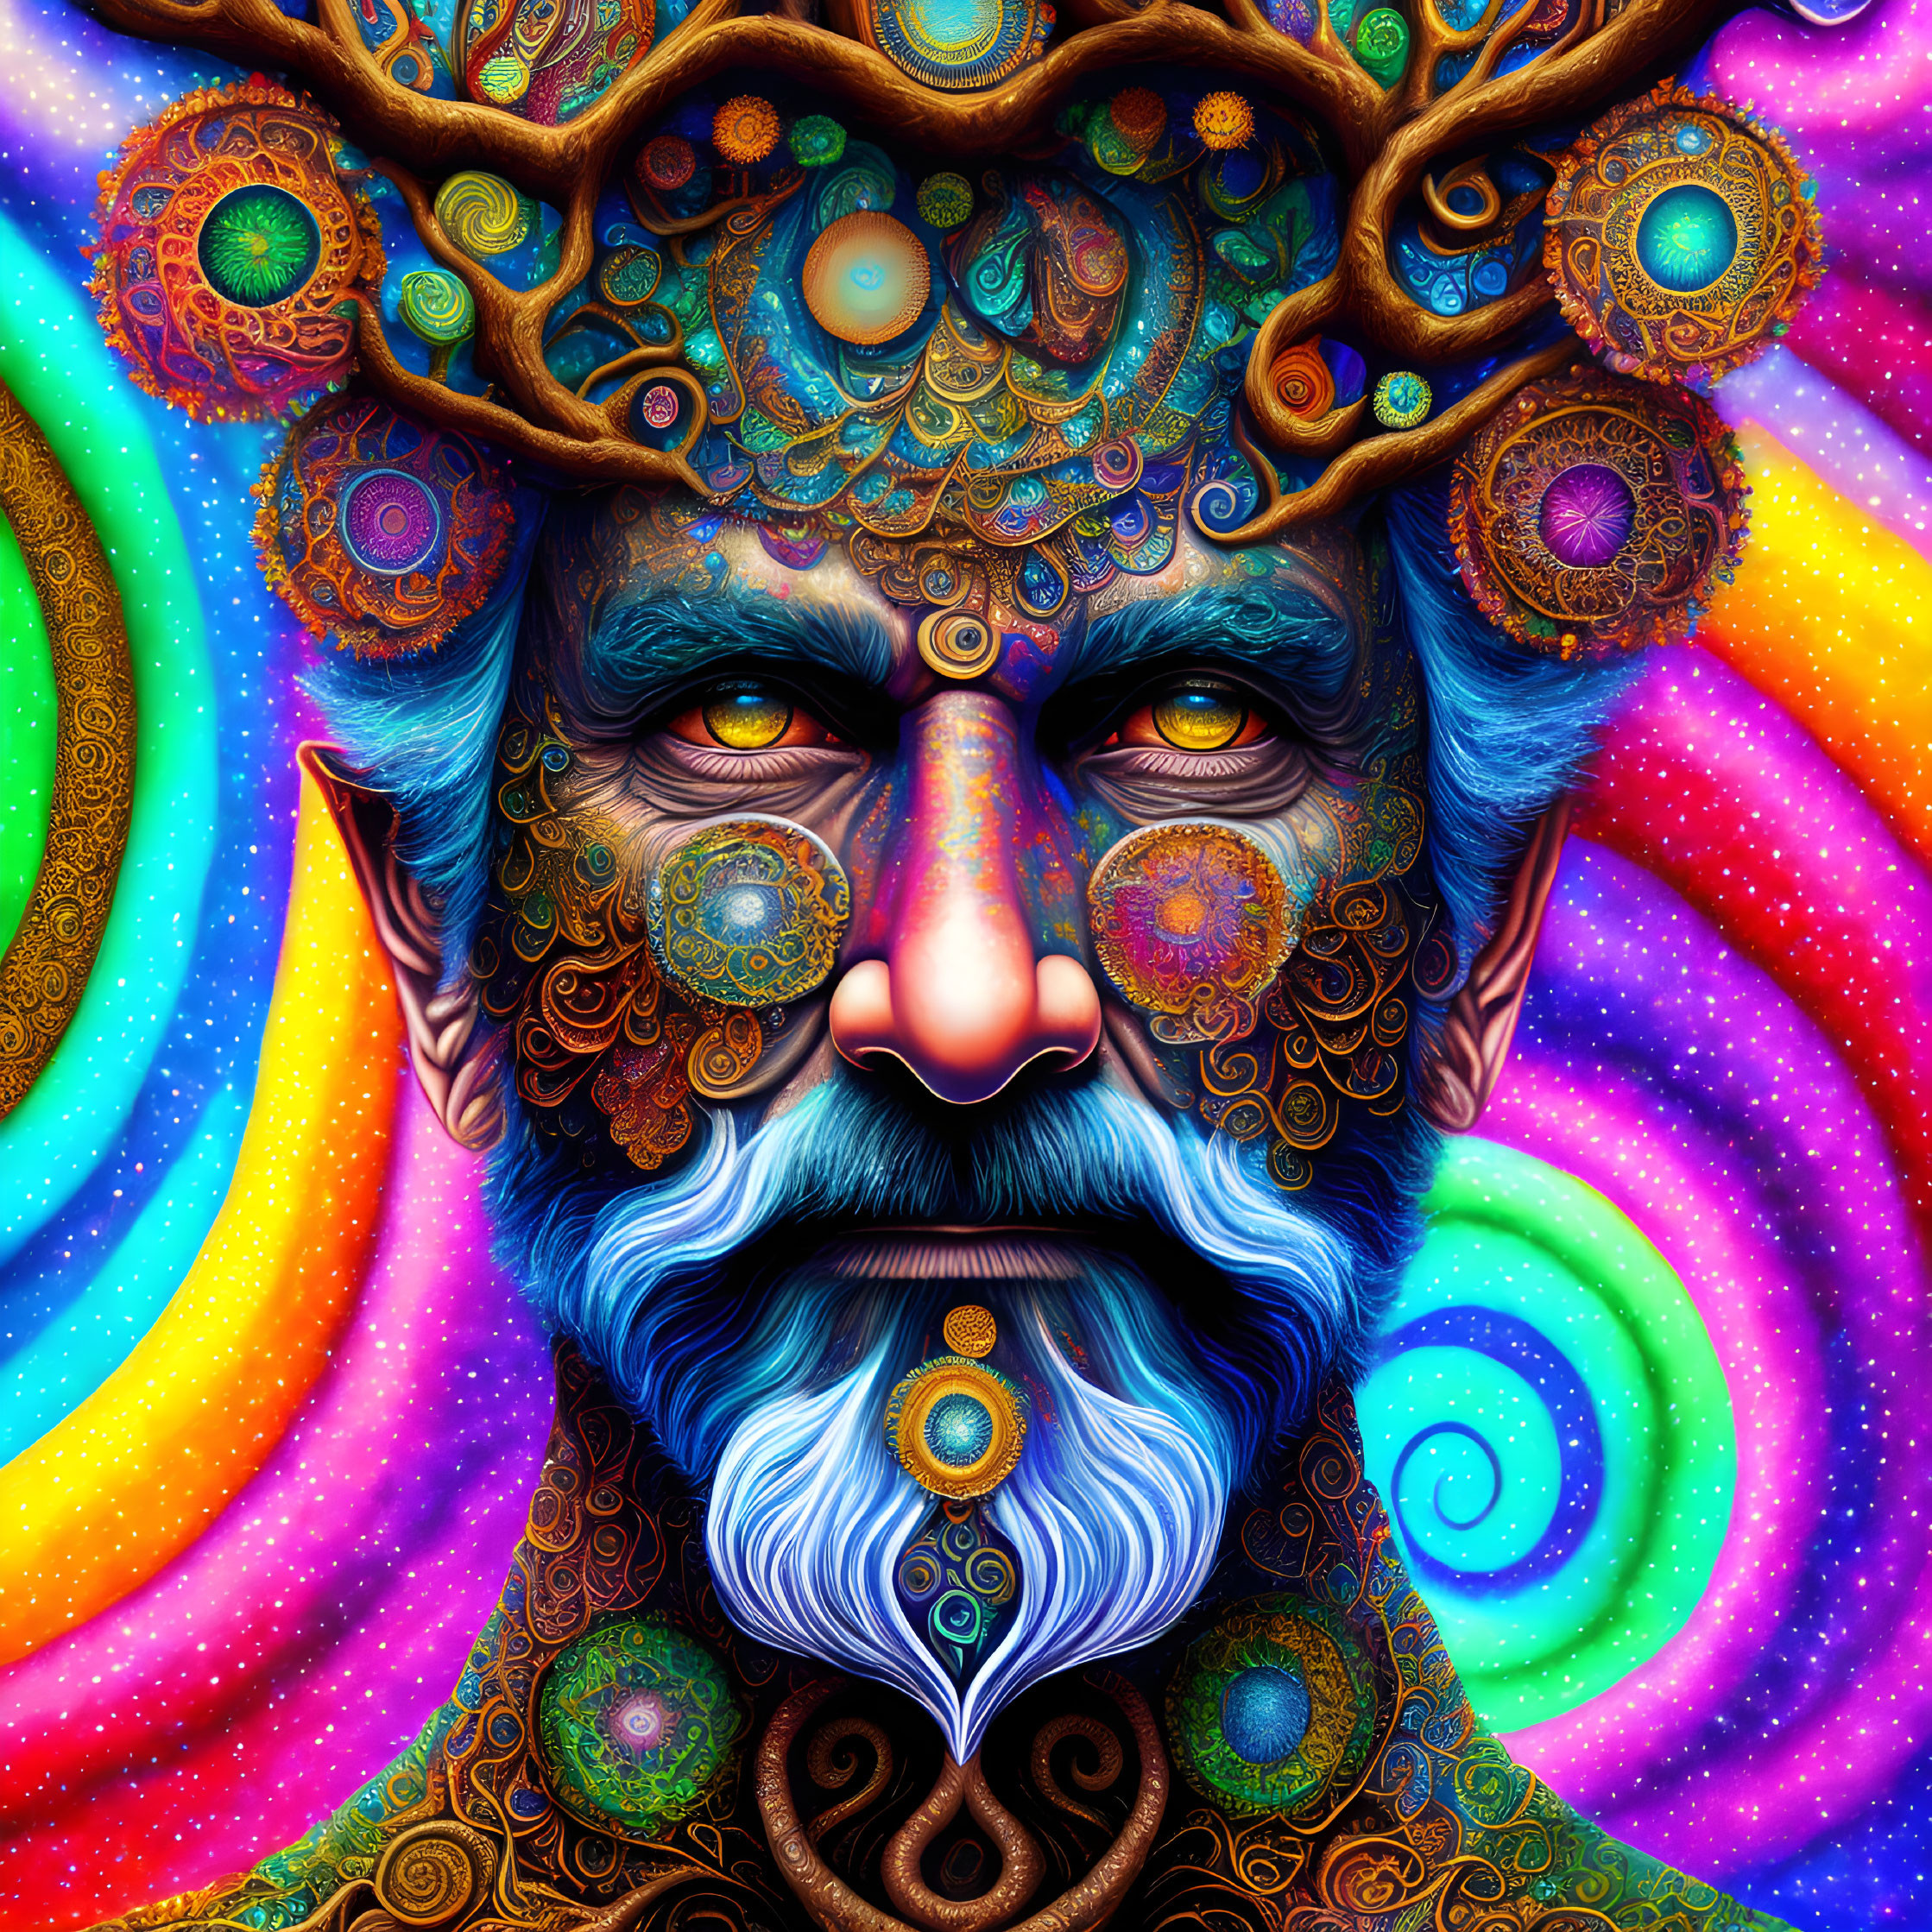 Colorful Psychedelic Portrait of Bearded Figure with Cosmic Motifs